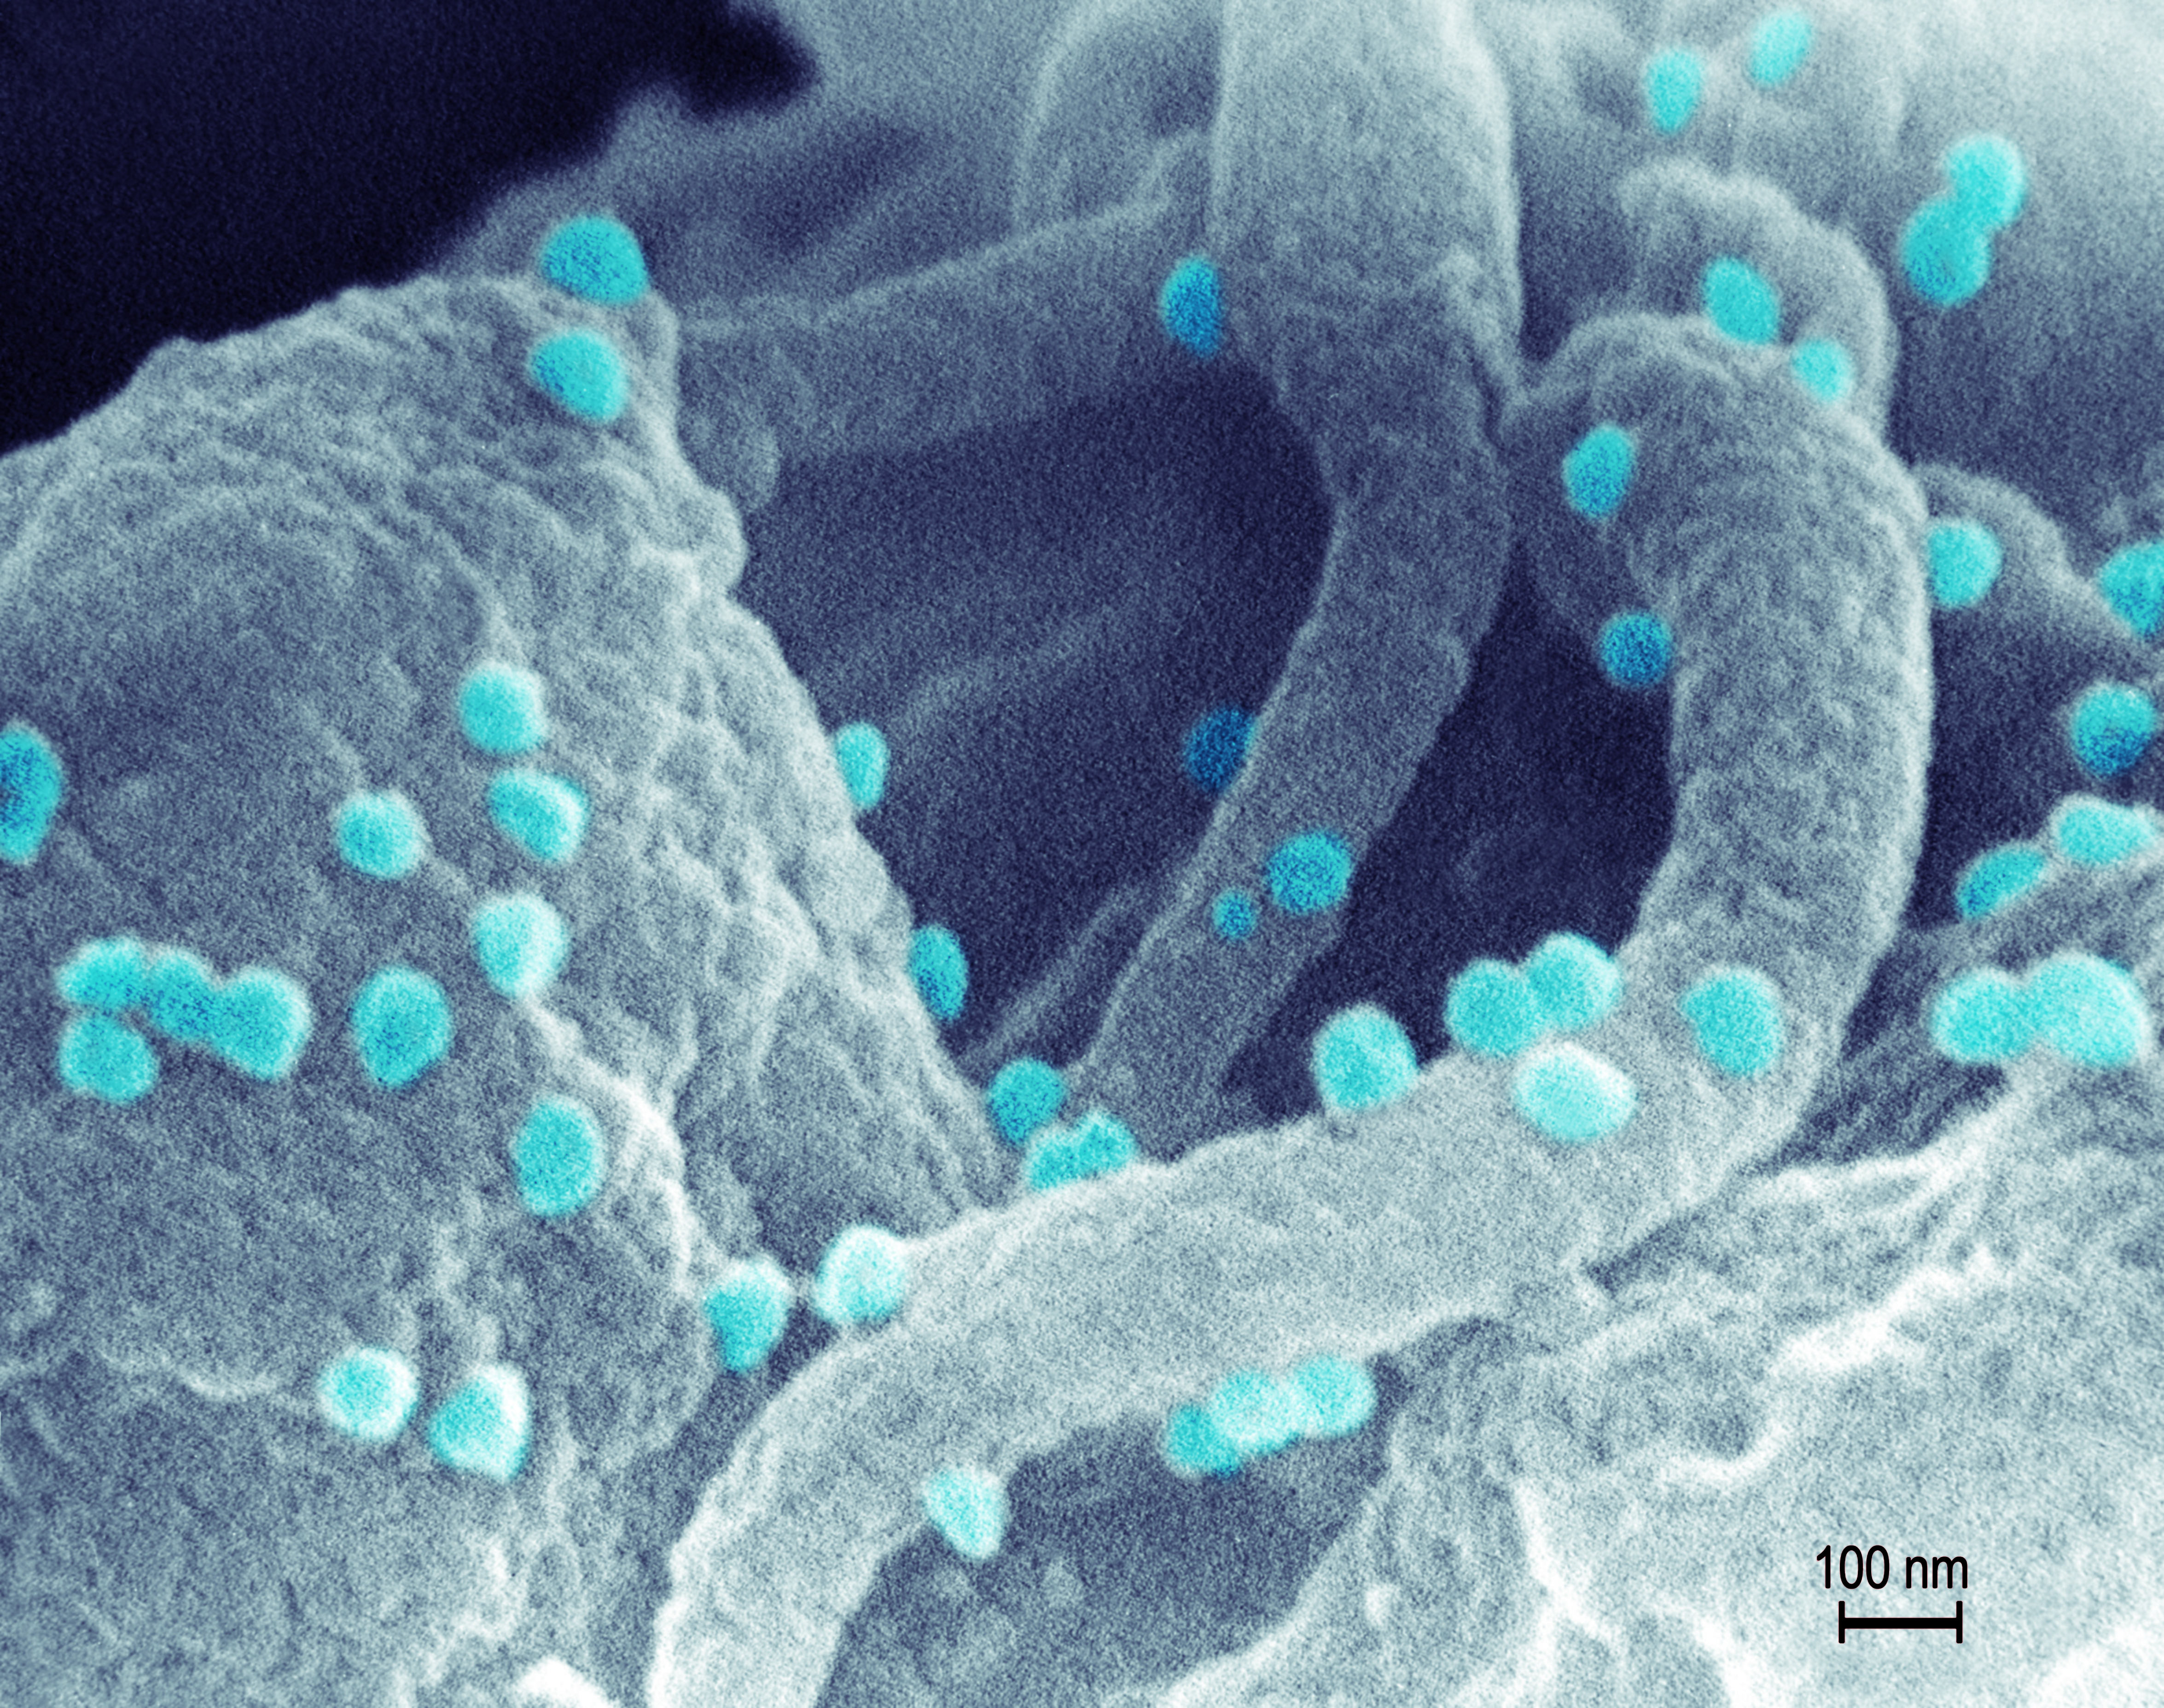 Scanning electron micrograph of HIV-1 (Getty Images)